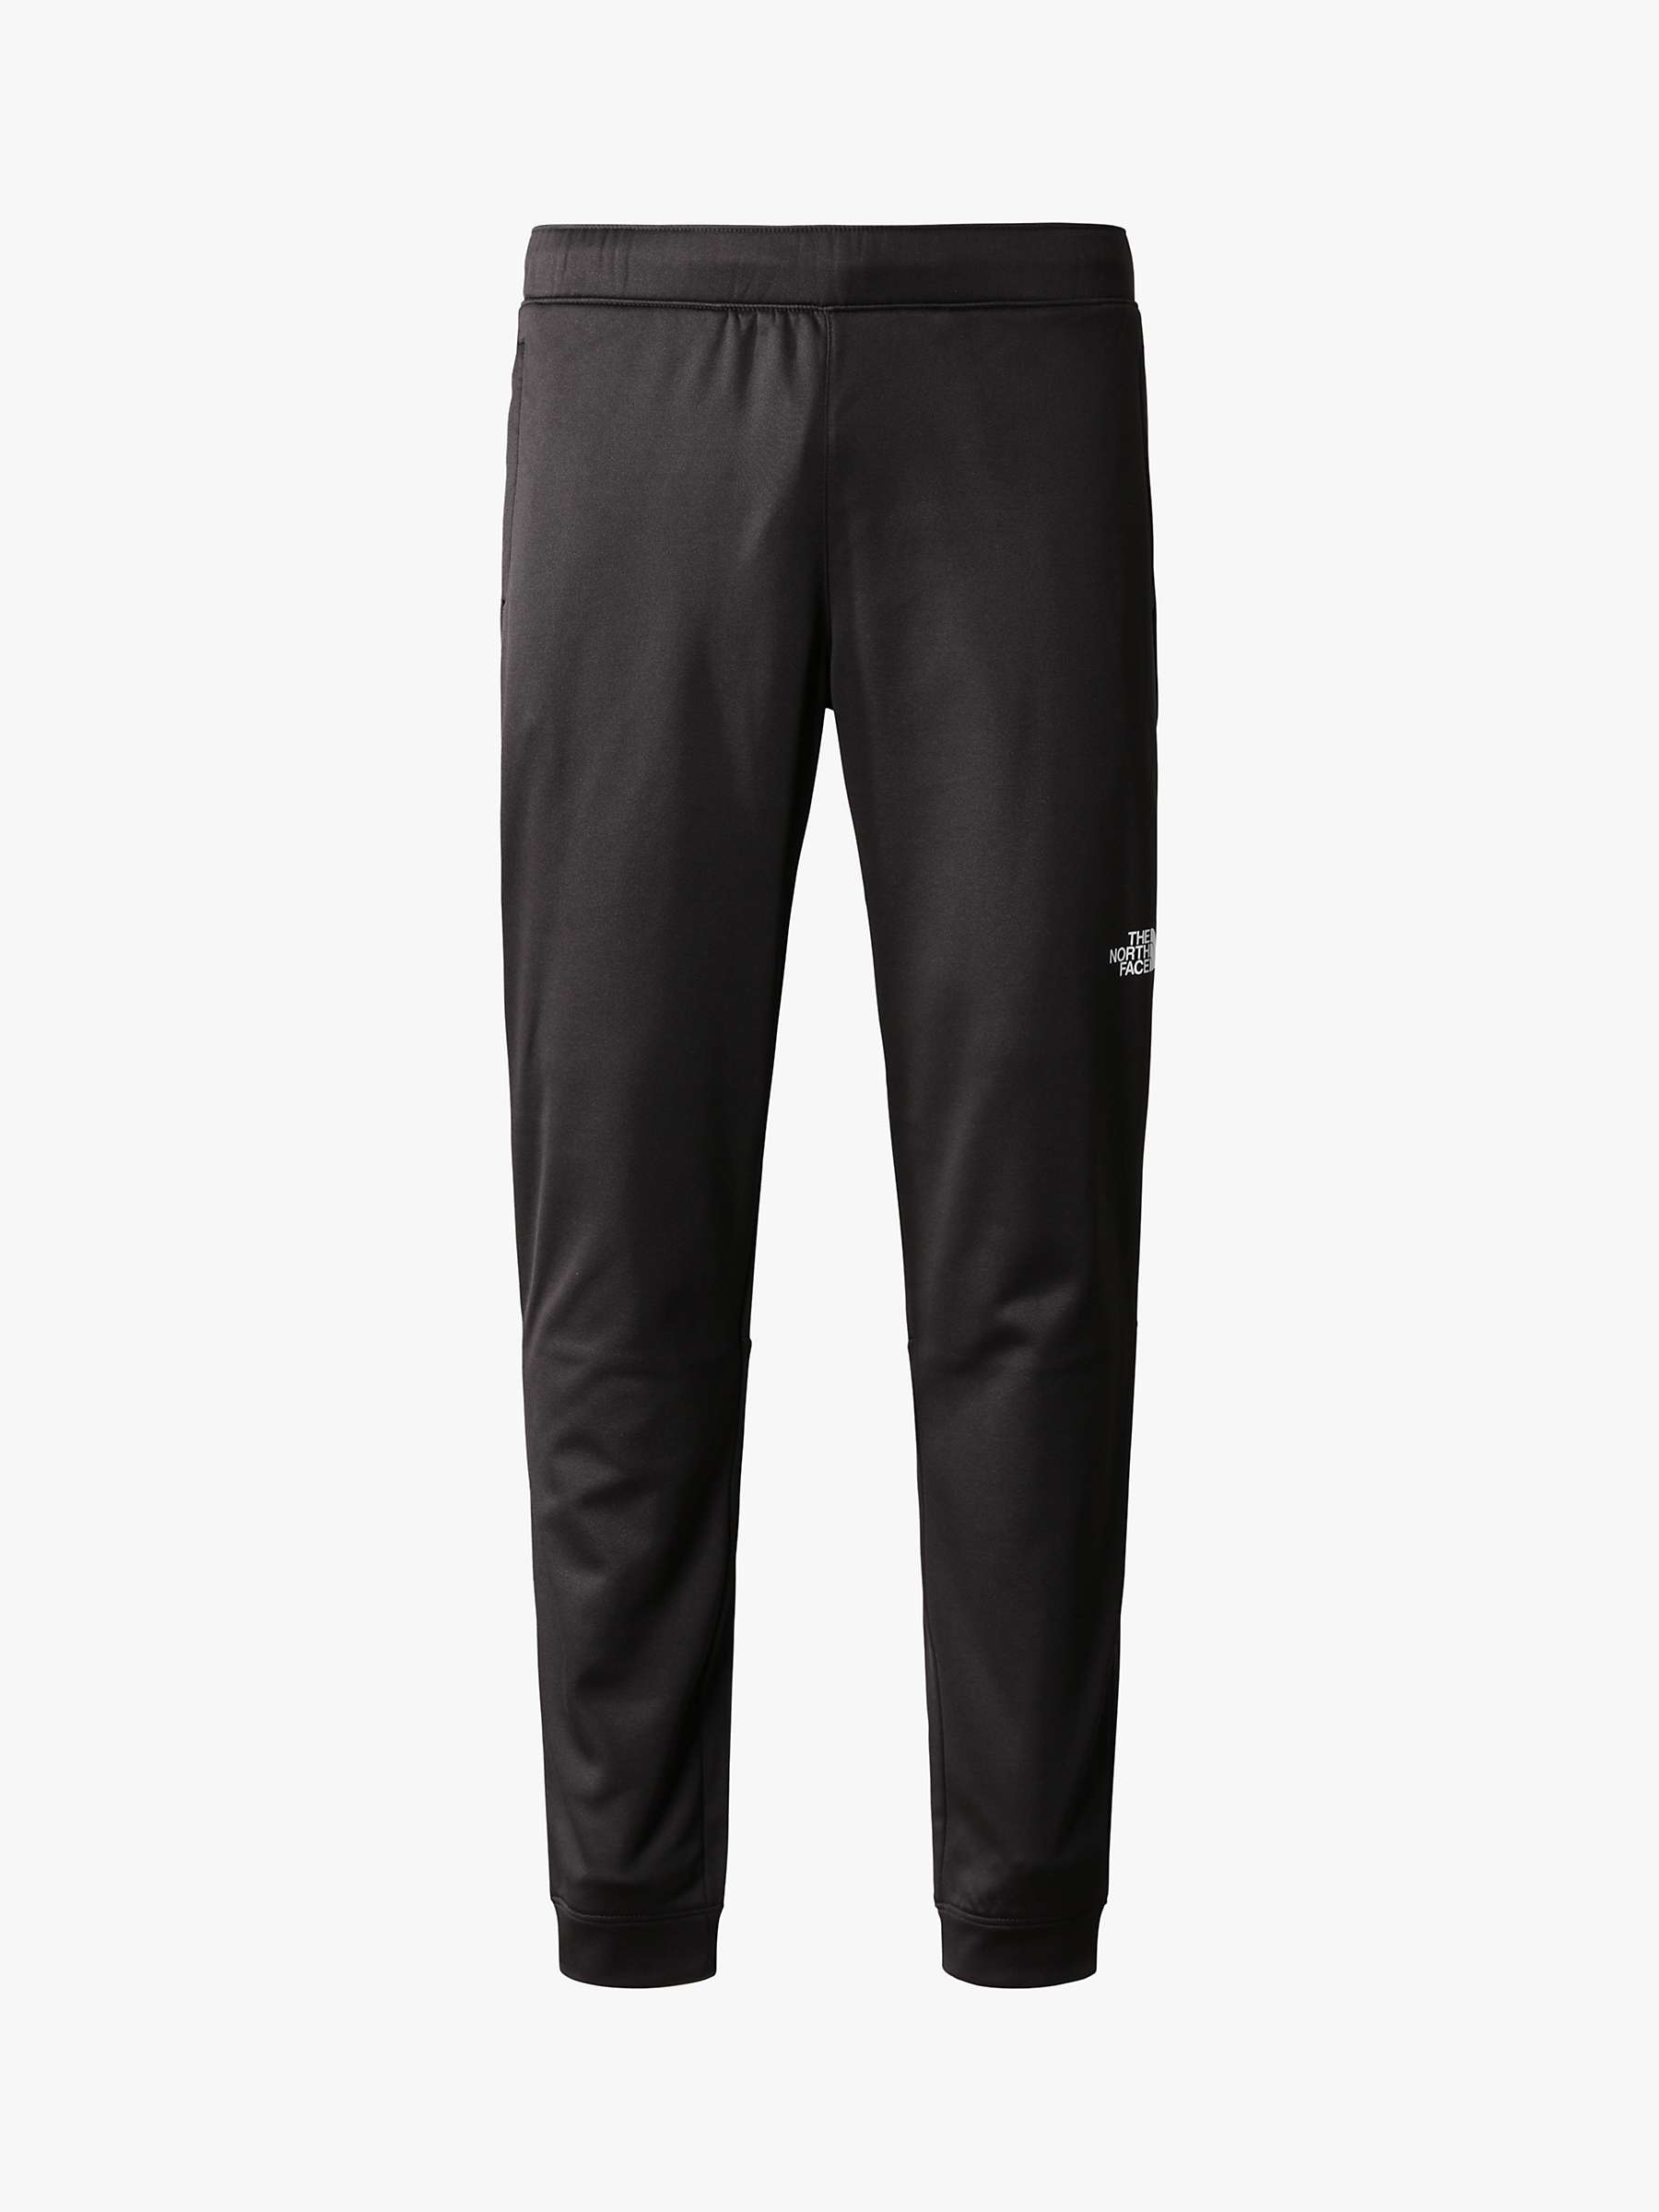 Buy The North Face Reaxion Fleece Joggers Online at johnlewis.com